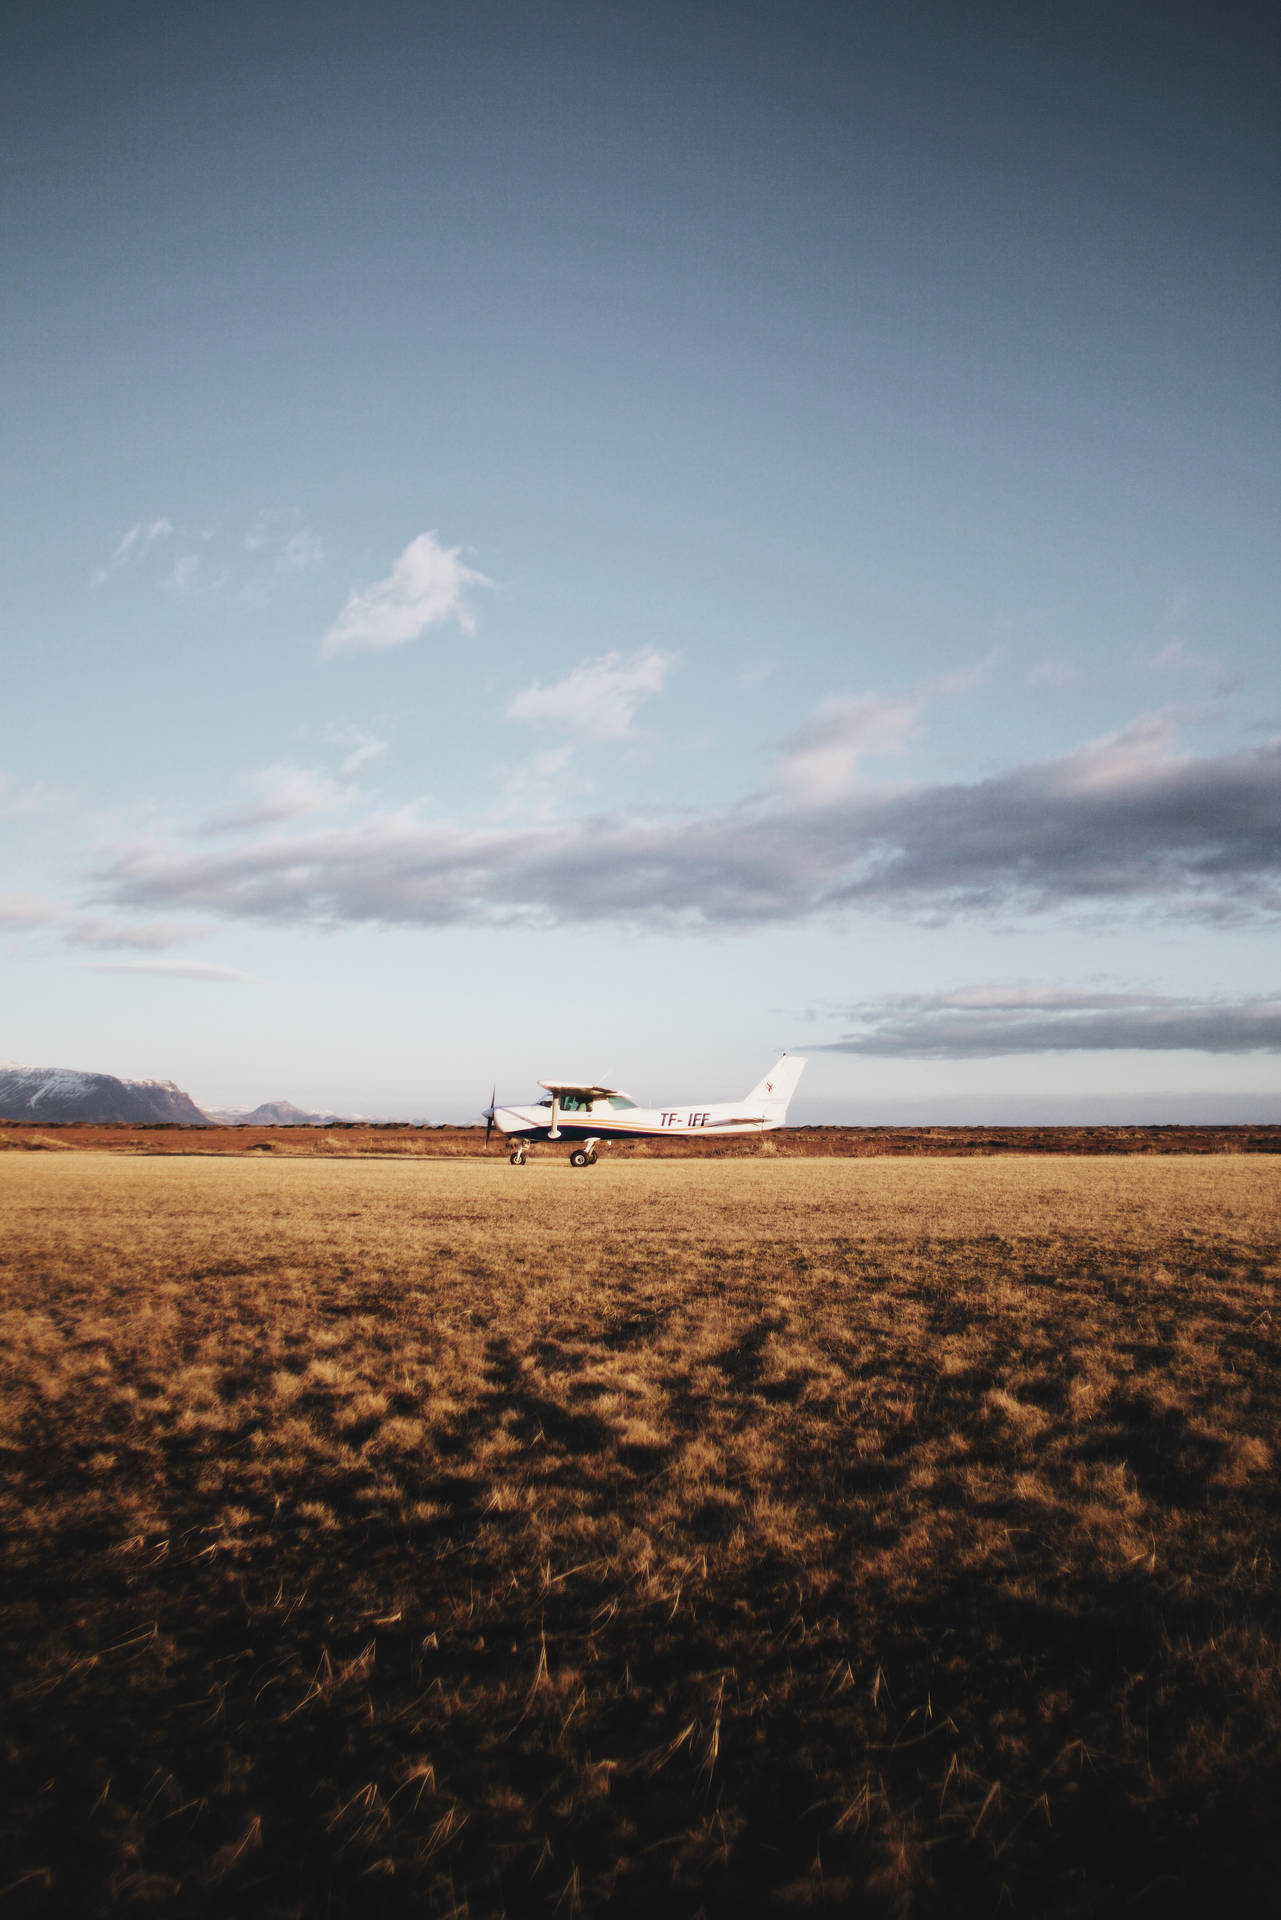 A Tinny White Plane Waiting For Takeoff In Open Field Background